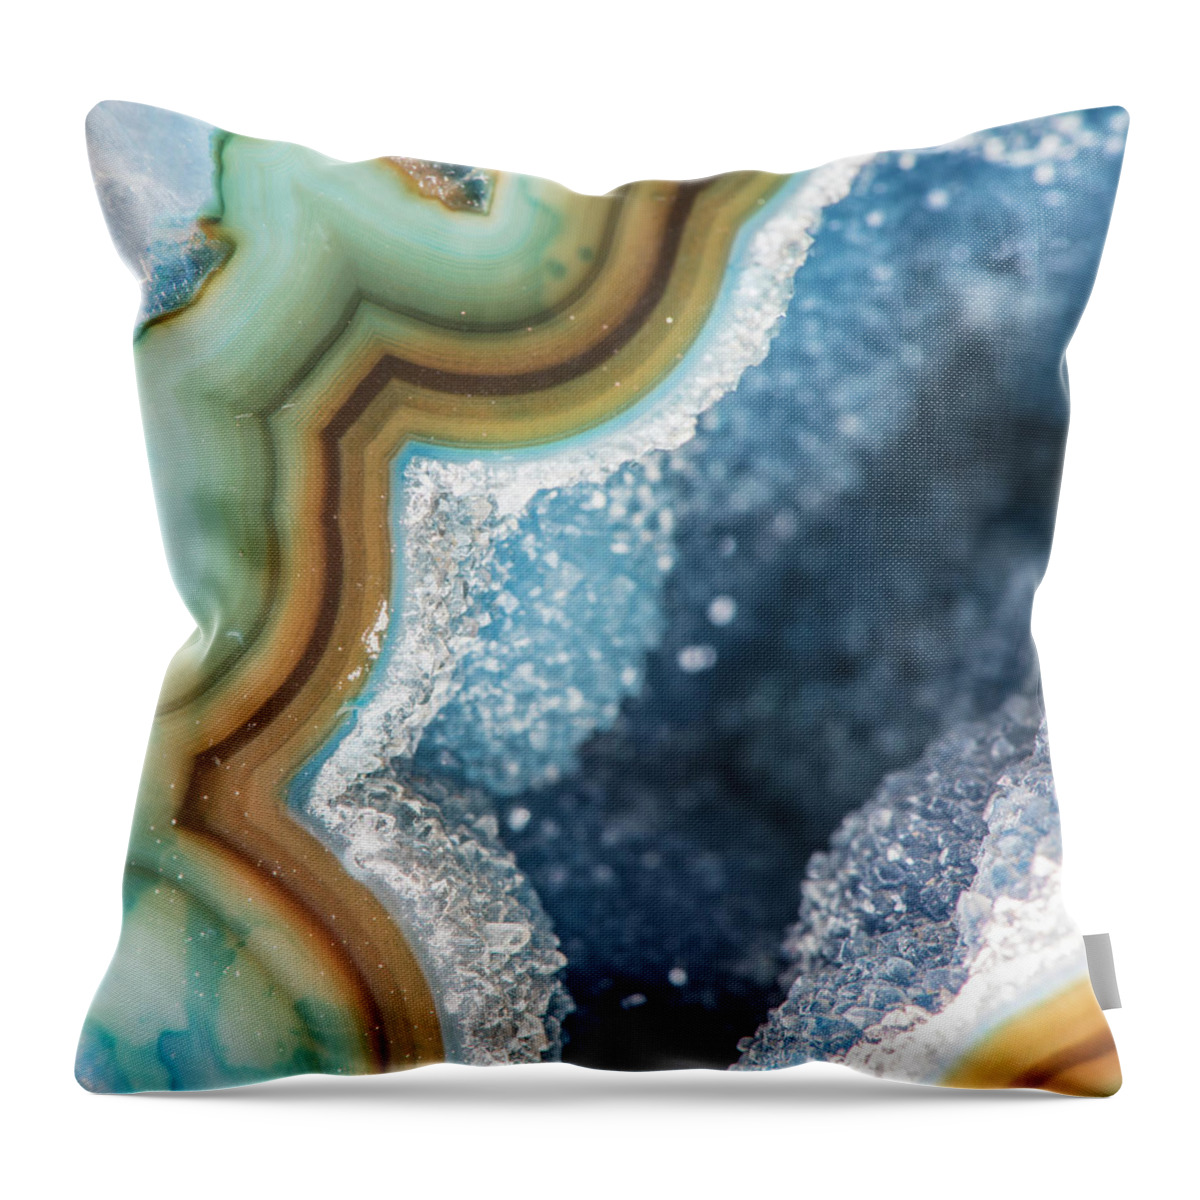 Volcanic Rock Throw Pillow featuring the photograph Macro Photography by John Lawson, Belhaven